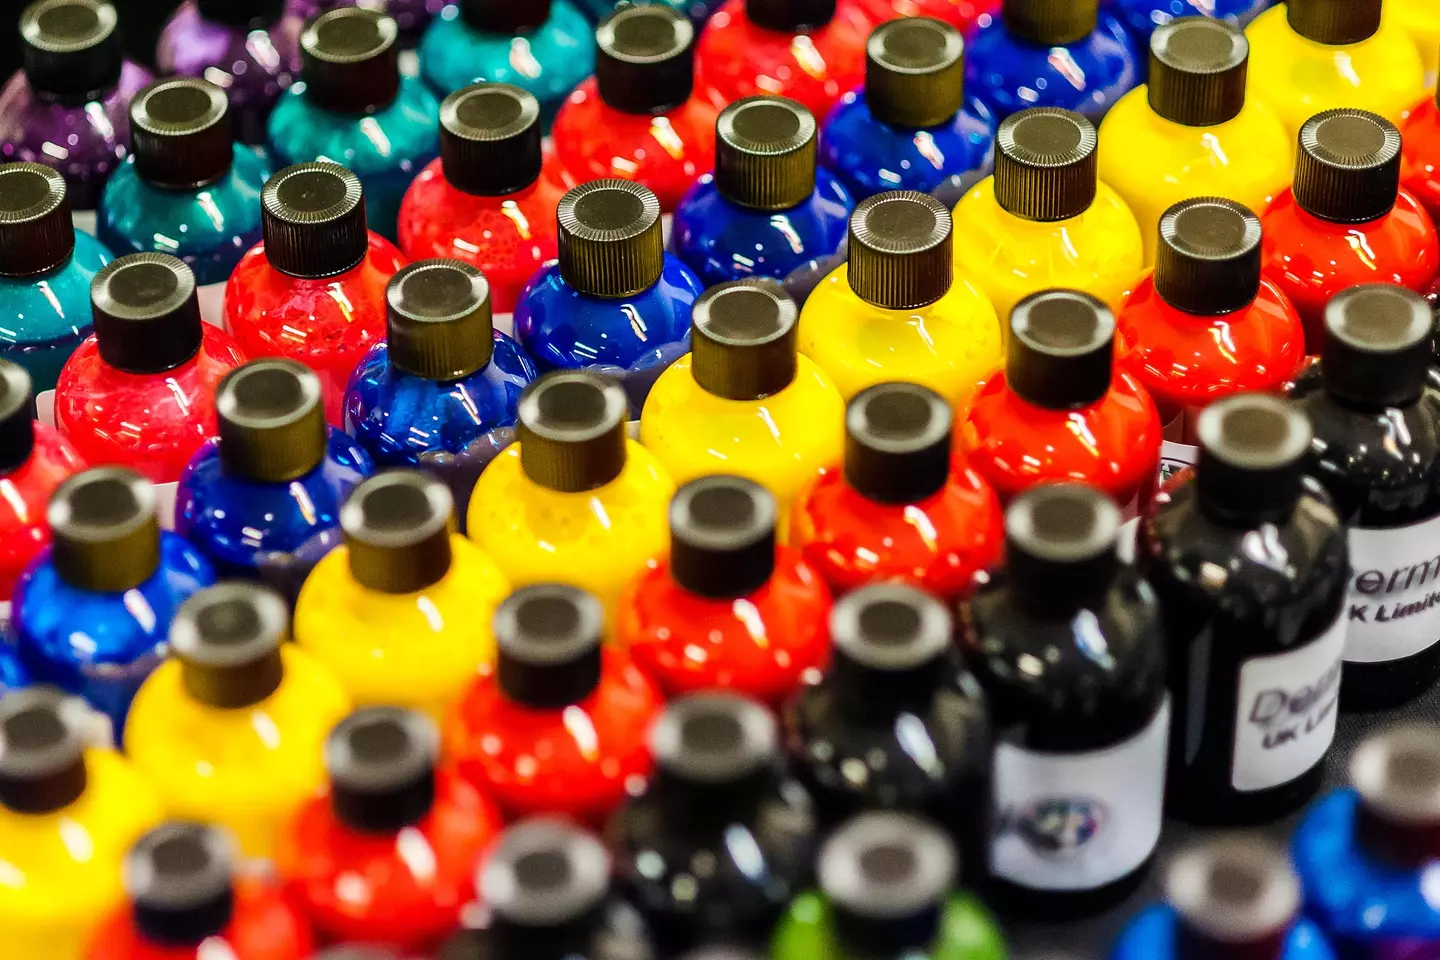 Last year the EU banned 4,000 harmful chemicals, many of them found in tattoo inks.